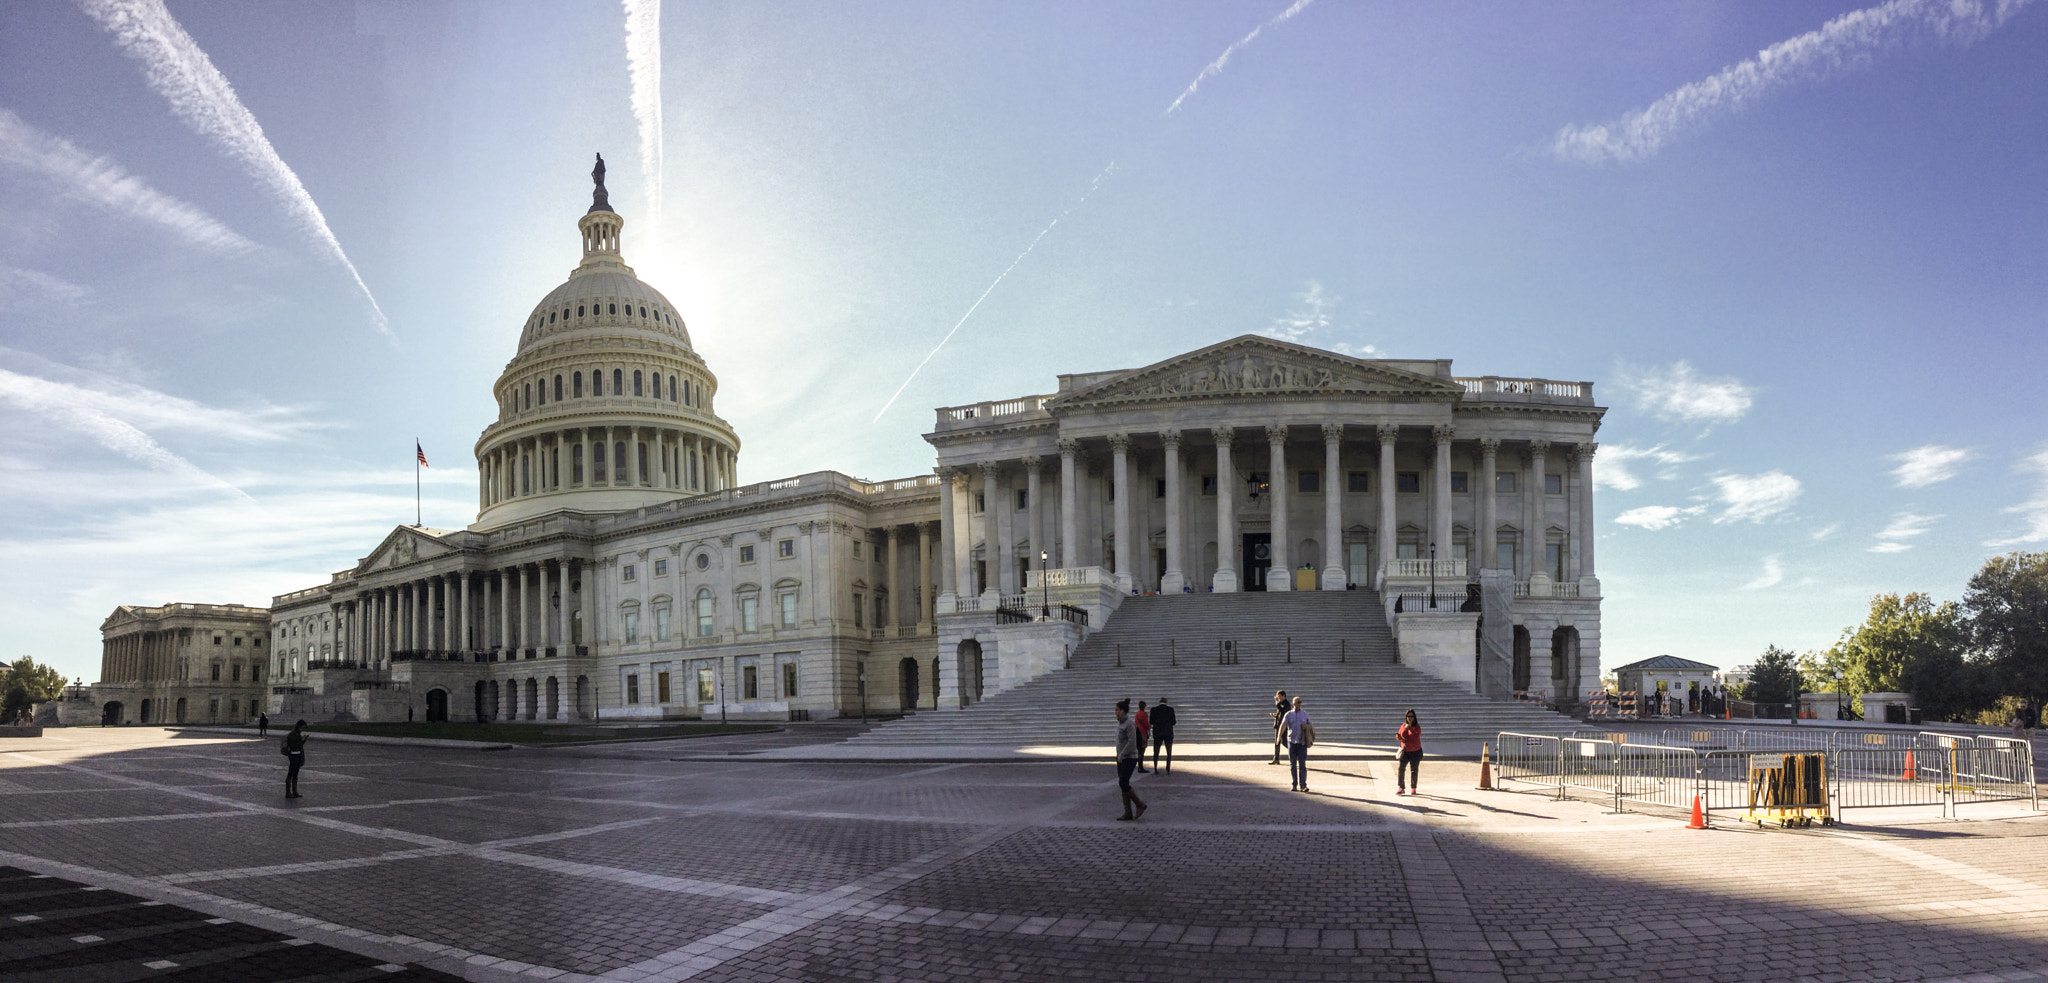 Apple iPad Air 2 sample photo. The capitol building photography